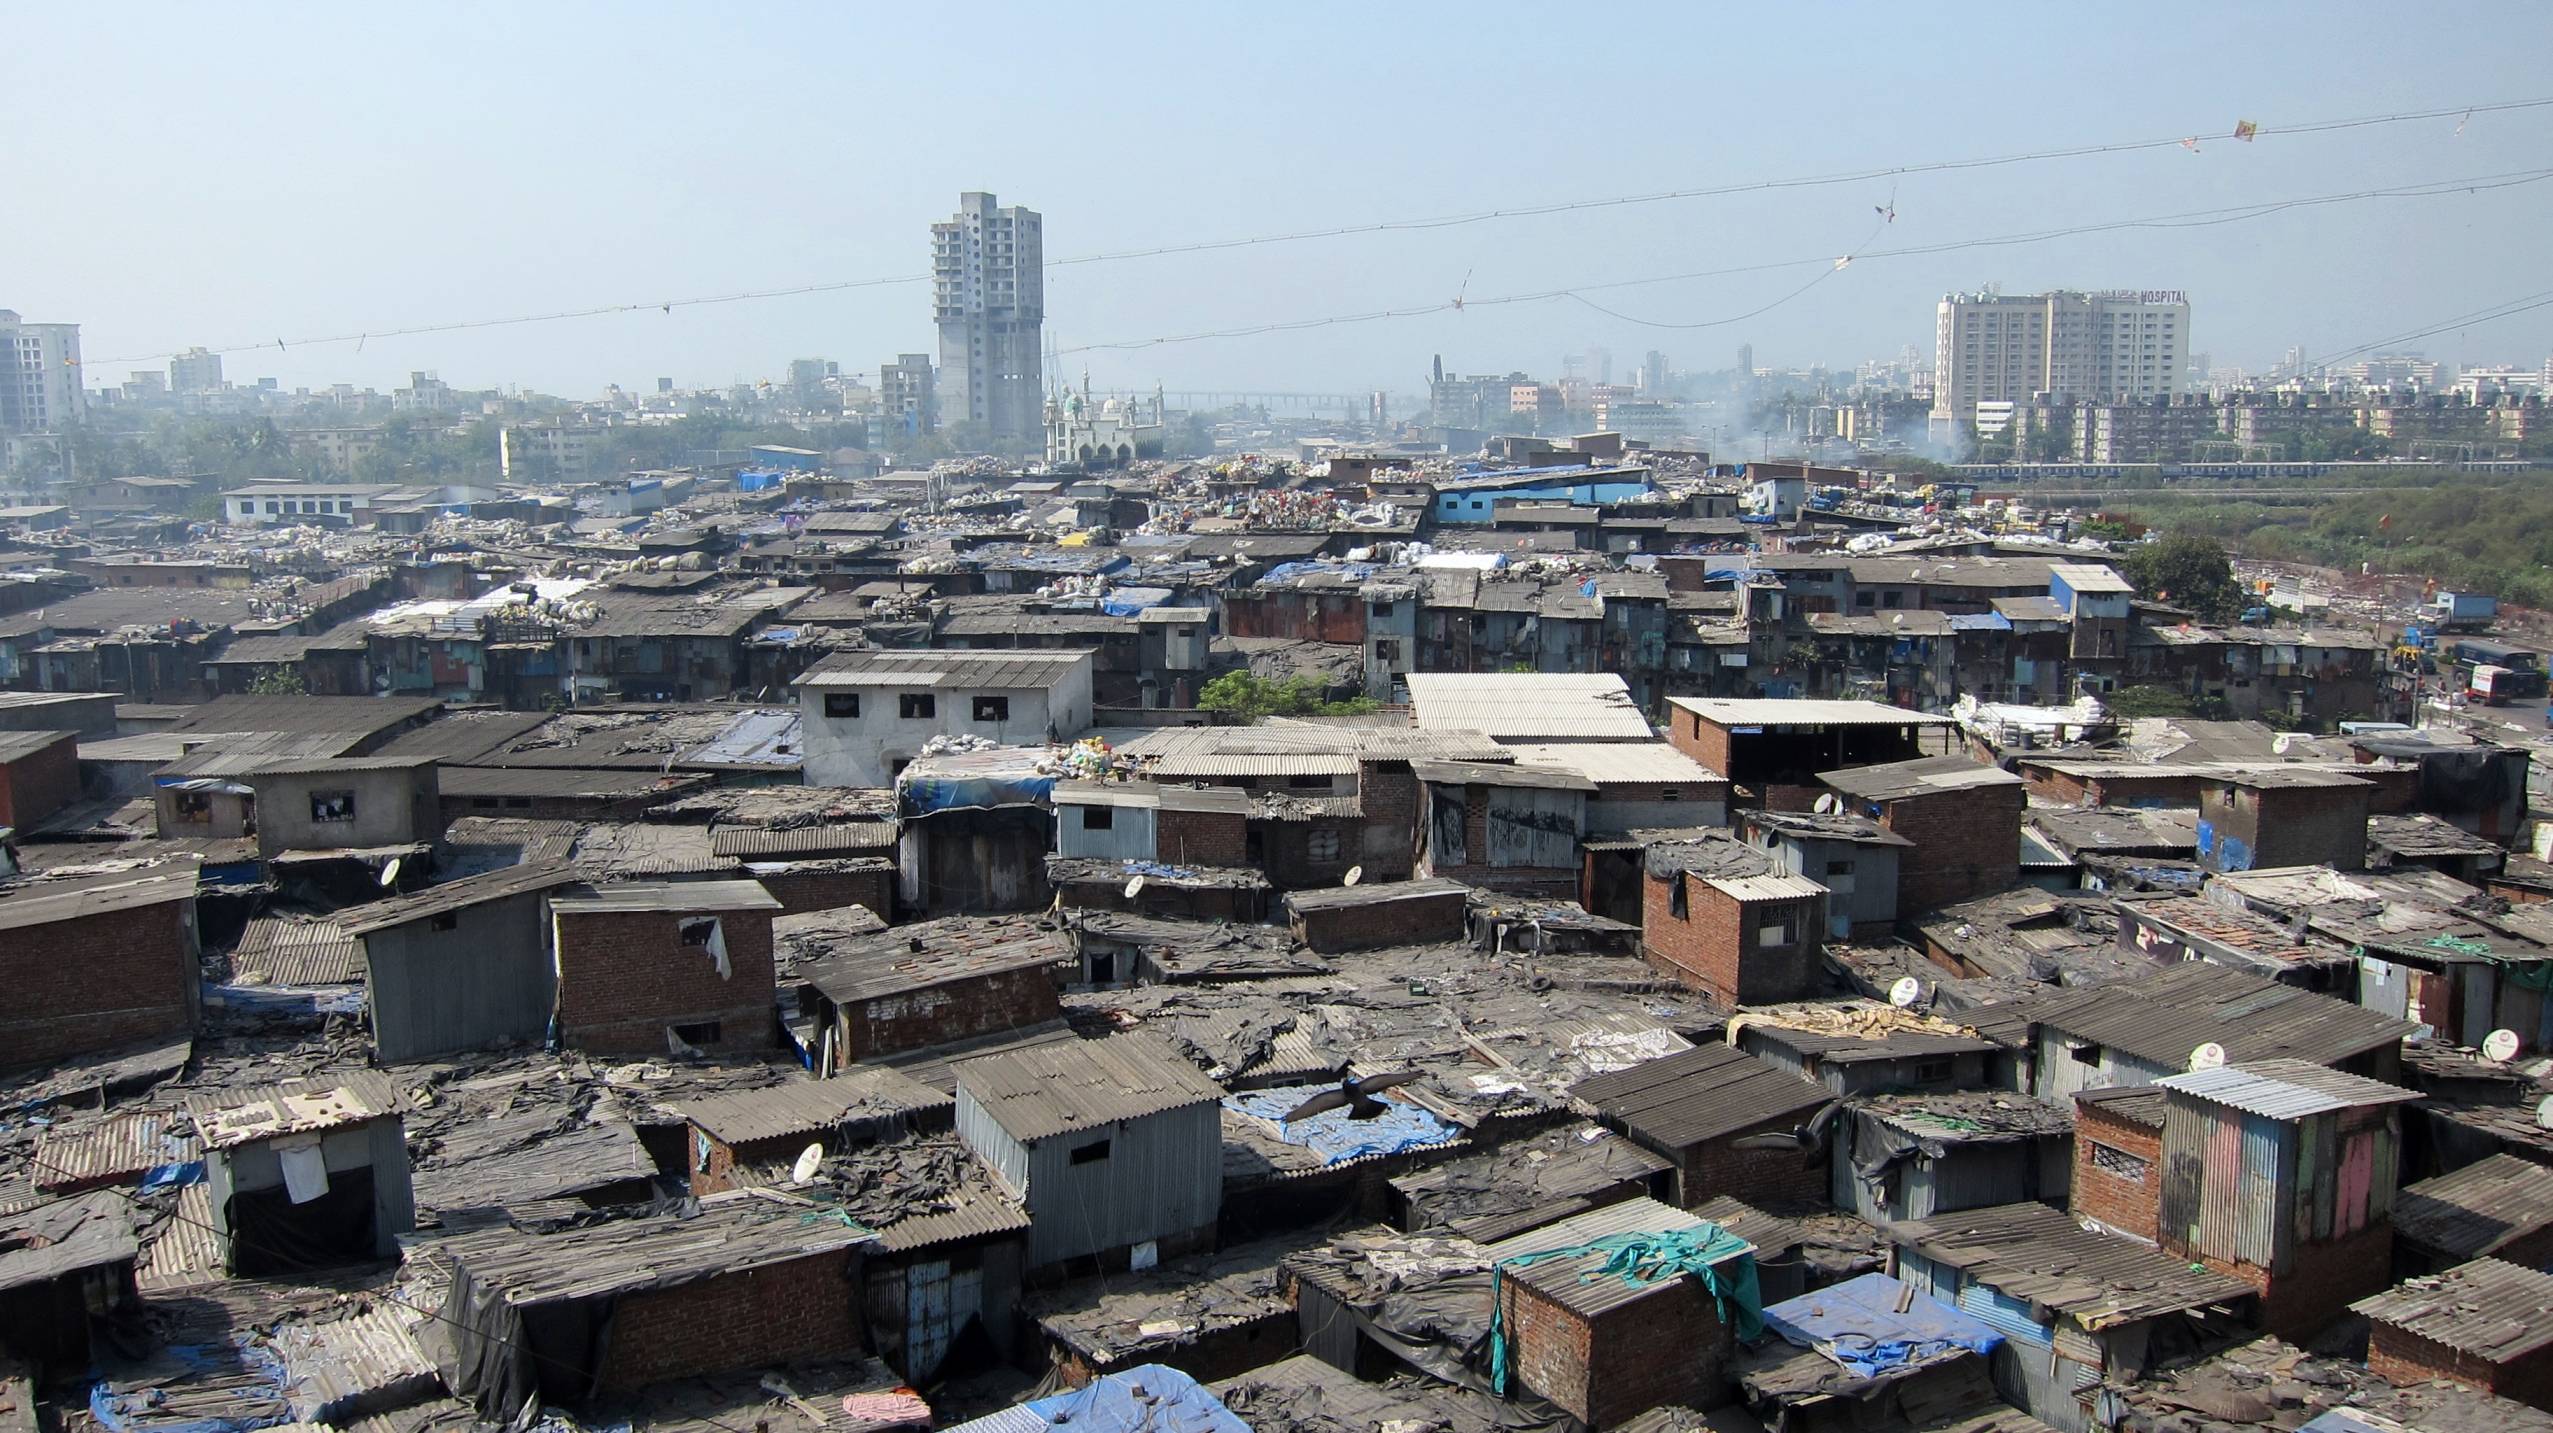 COVID-19: Anti-malarial drug to be tested on thousands in Mumbai slums